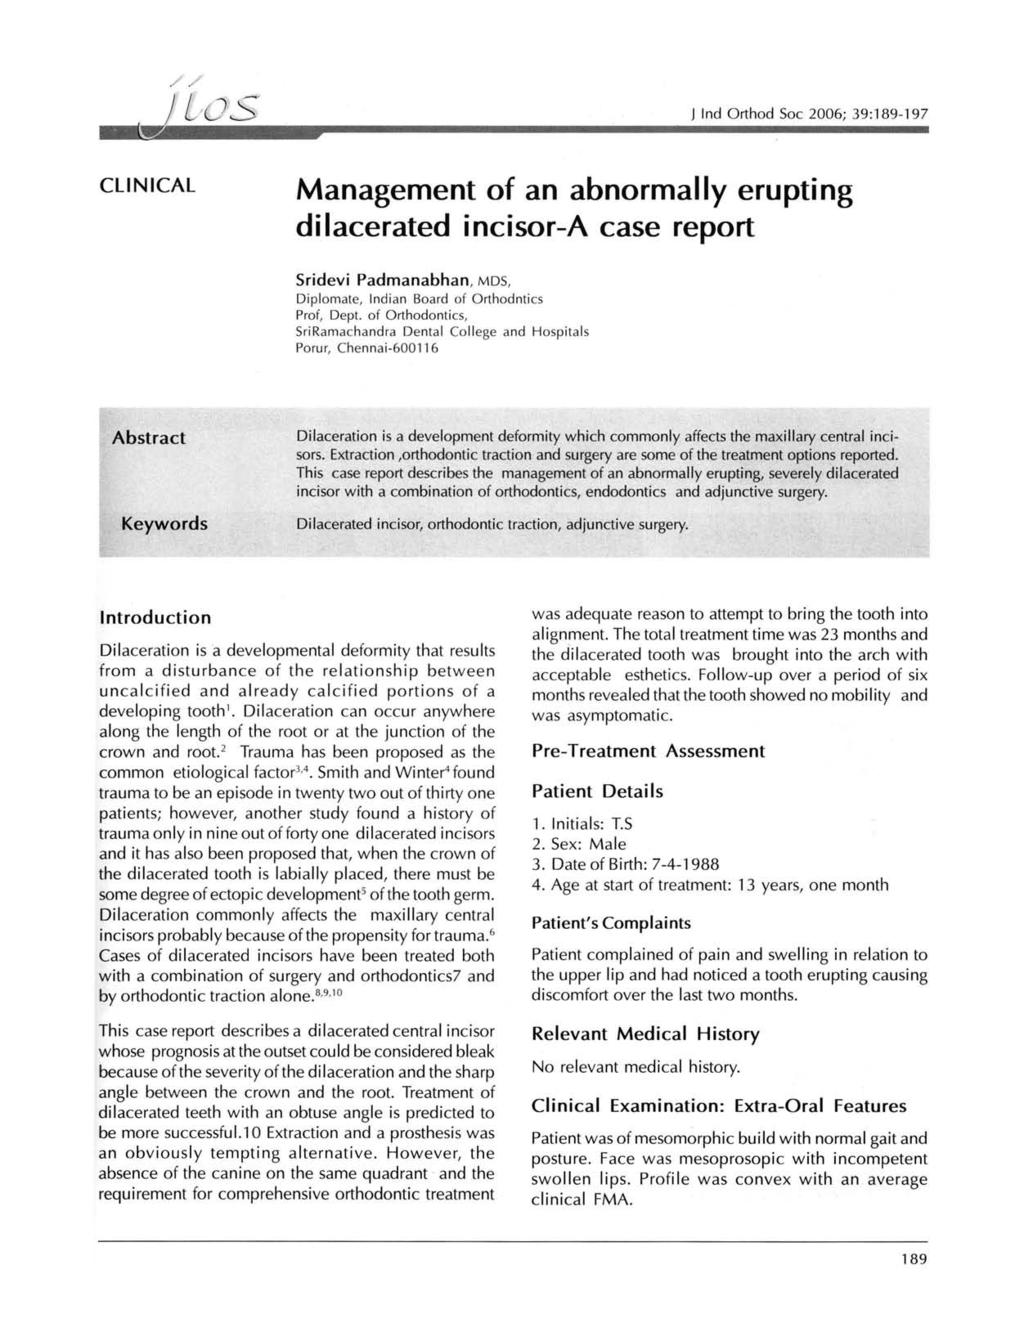 ..// J ; CLINICAL ) 0(]~ Ind Orthod Soc 2006; 39:189-197 Management of an abnormally erupting dilacerated incisor-a case report Sridevi Padmanabhan, MDS, Diplomate, Indian Board of Orthodntics Prof,